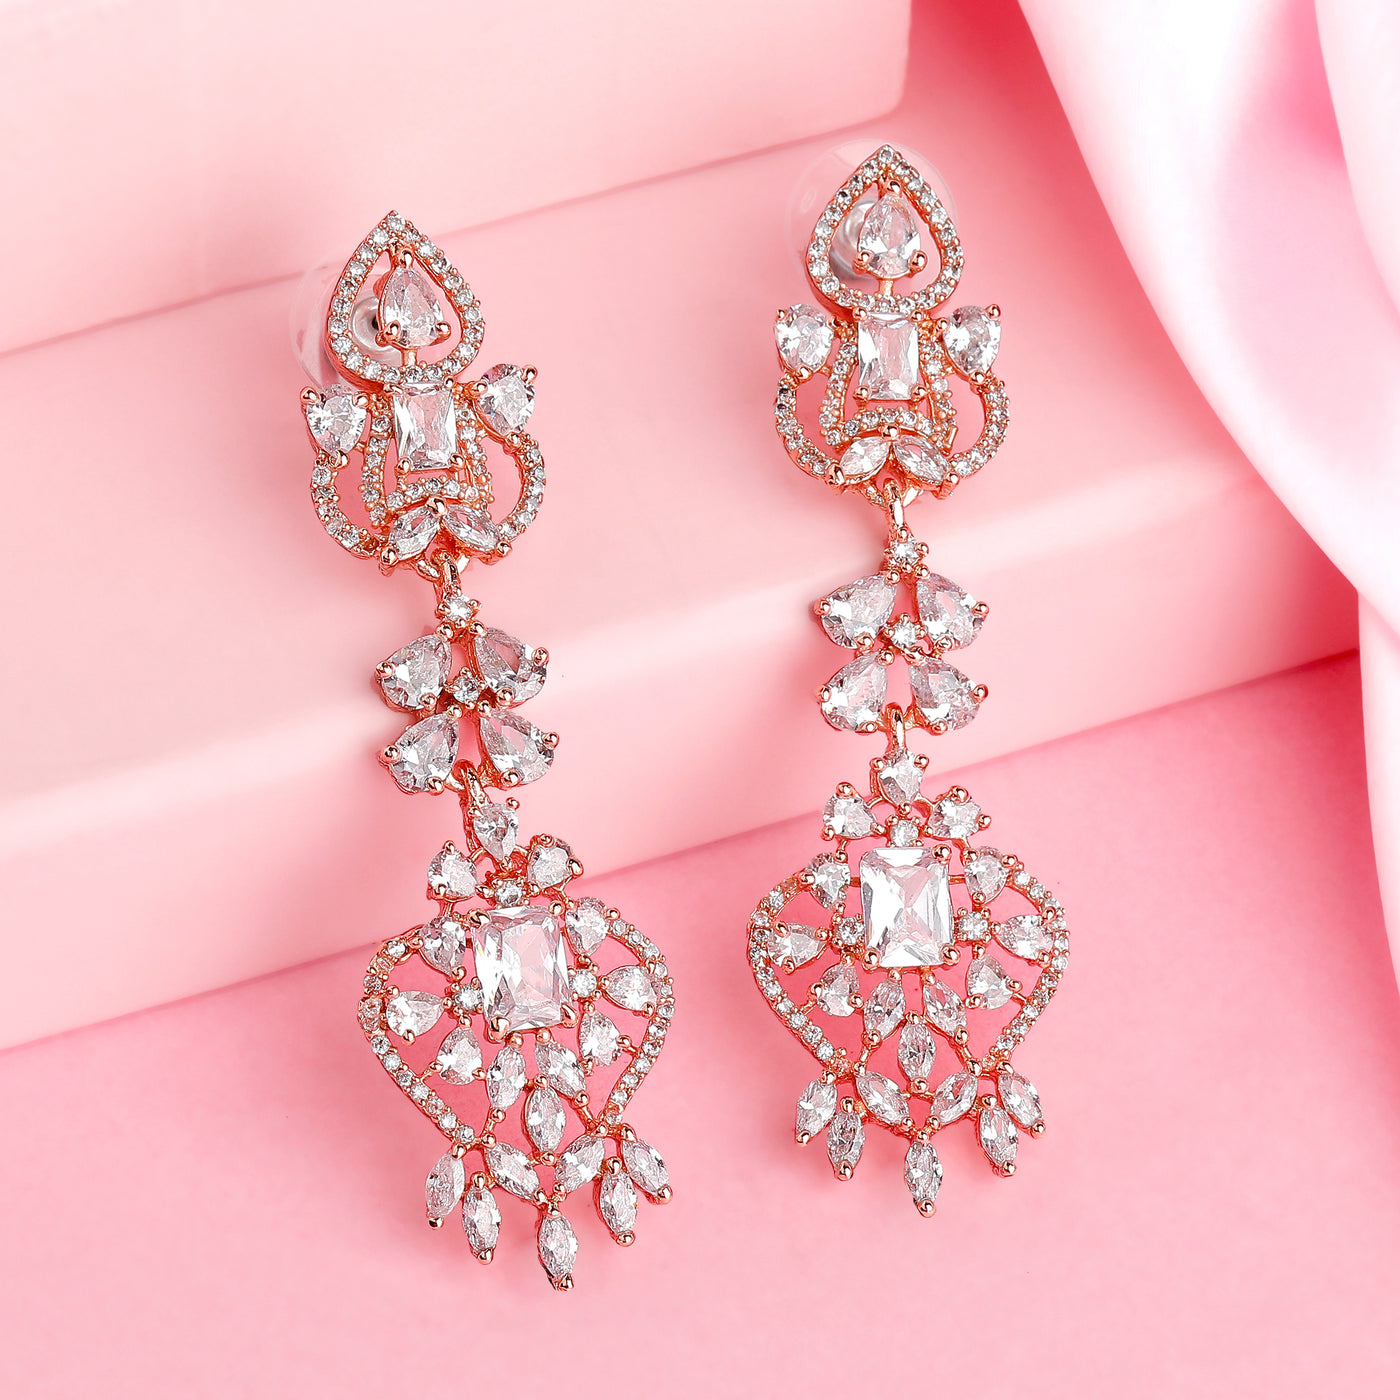 Estele Rose Gold Plated CZ Magnificent Drop Earrings with White Crystals for Women